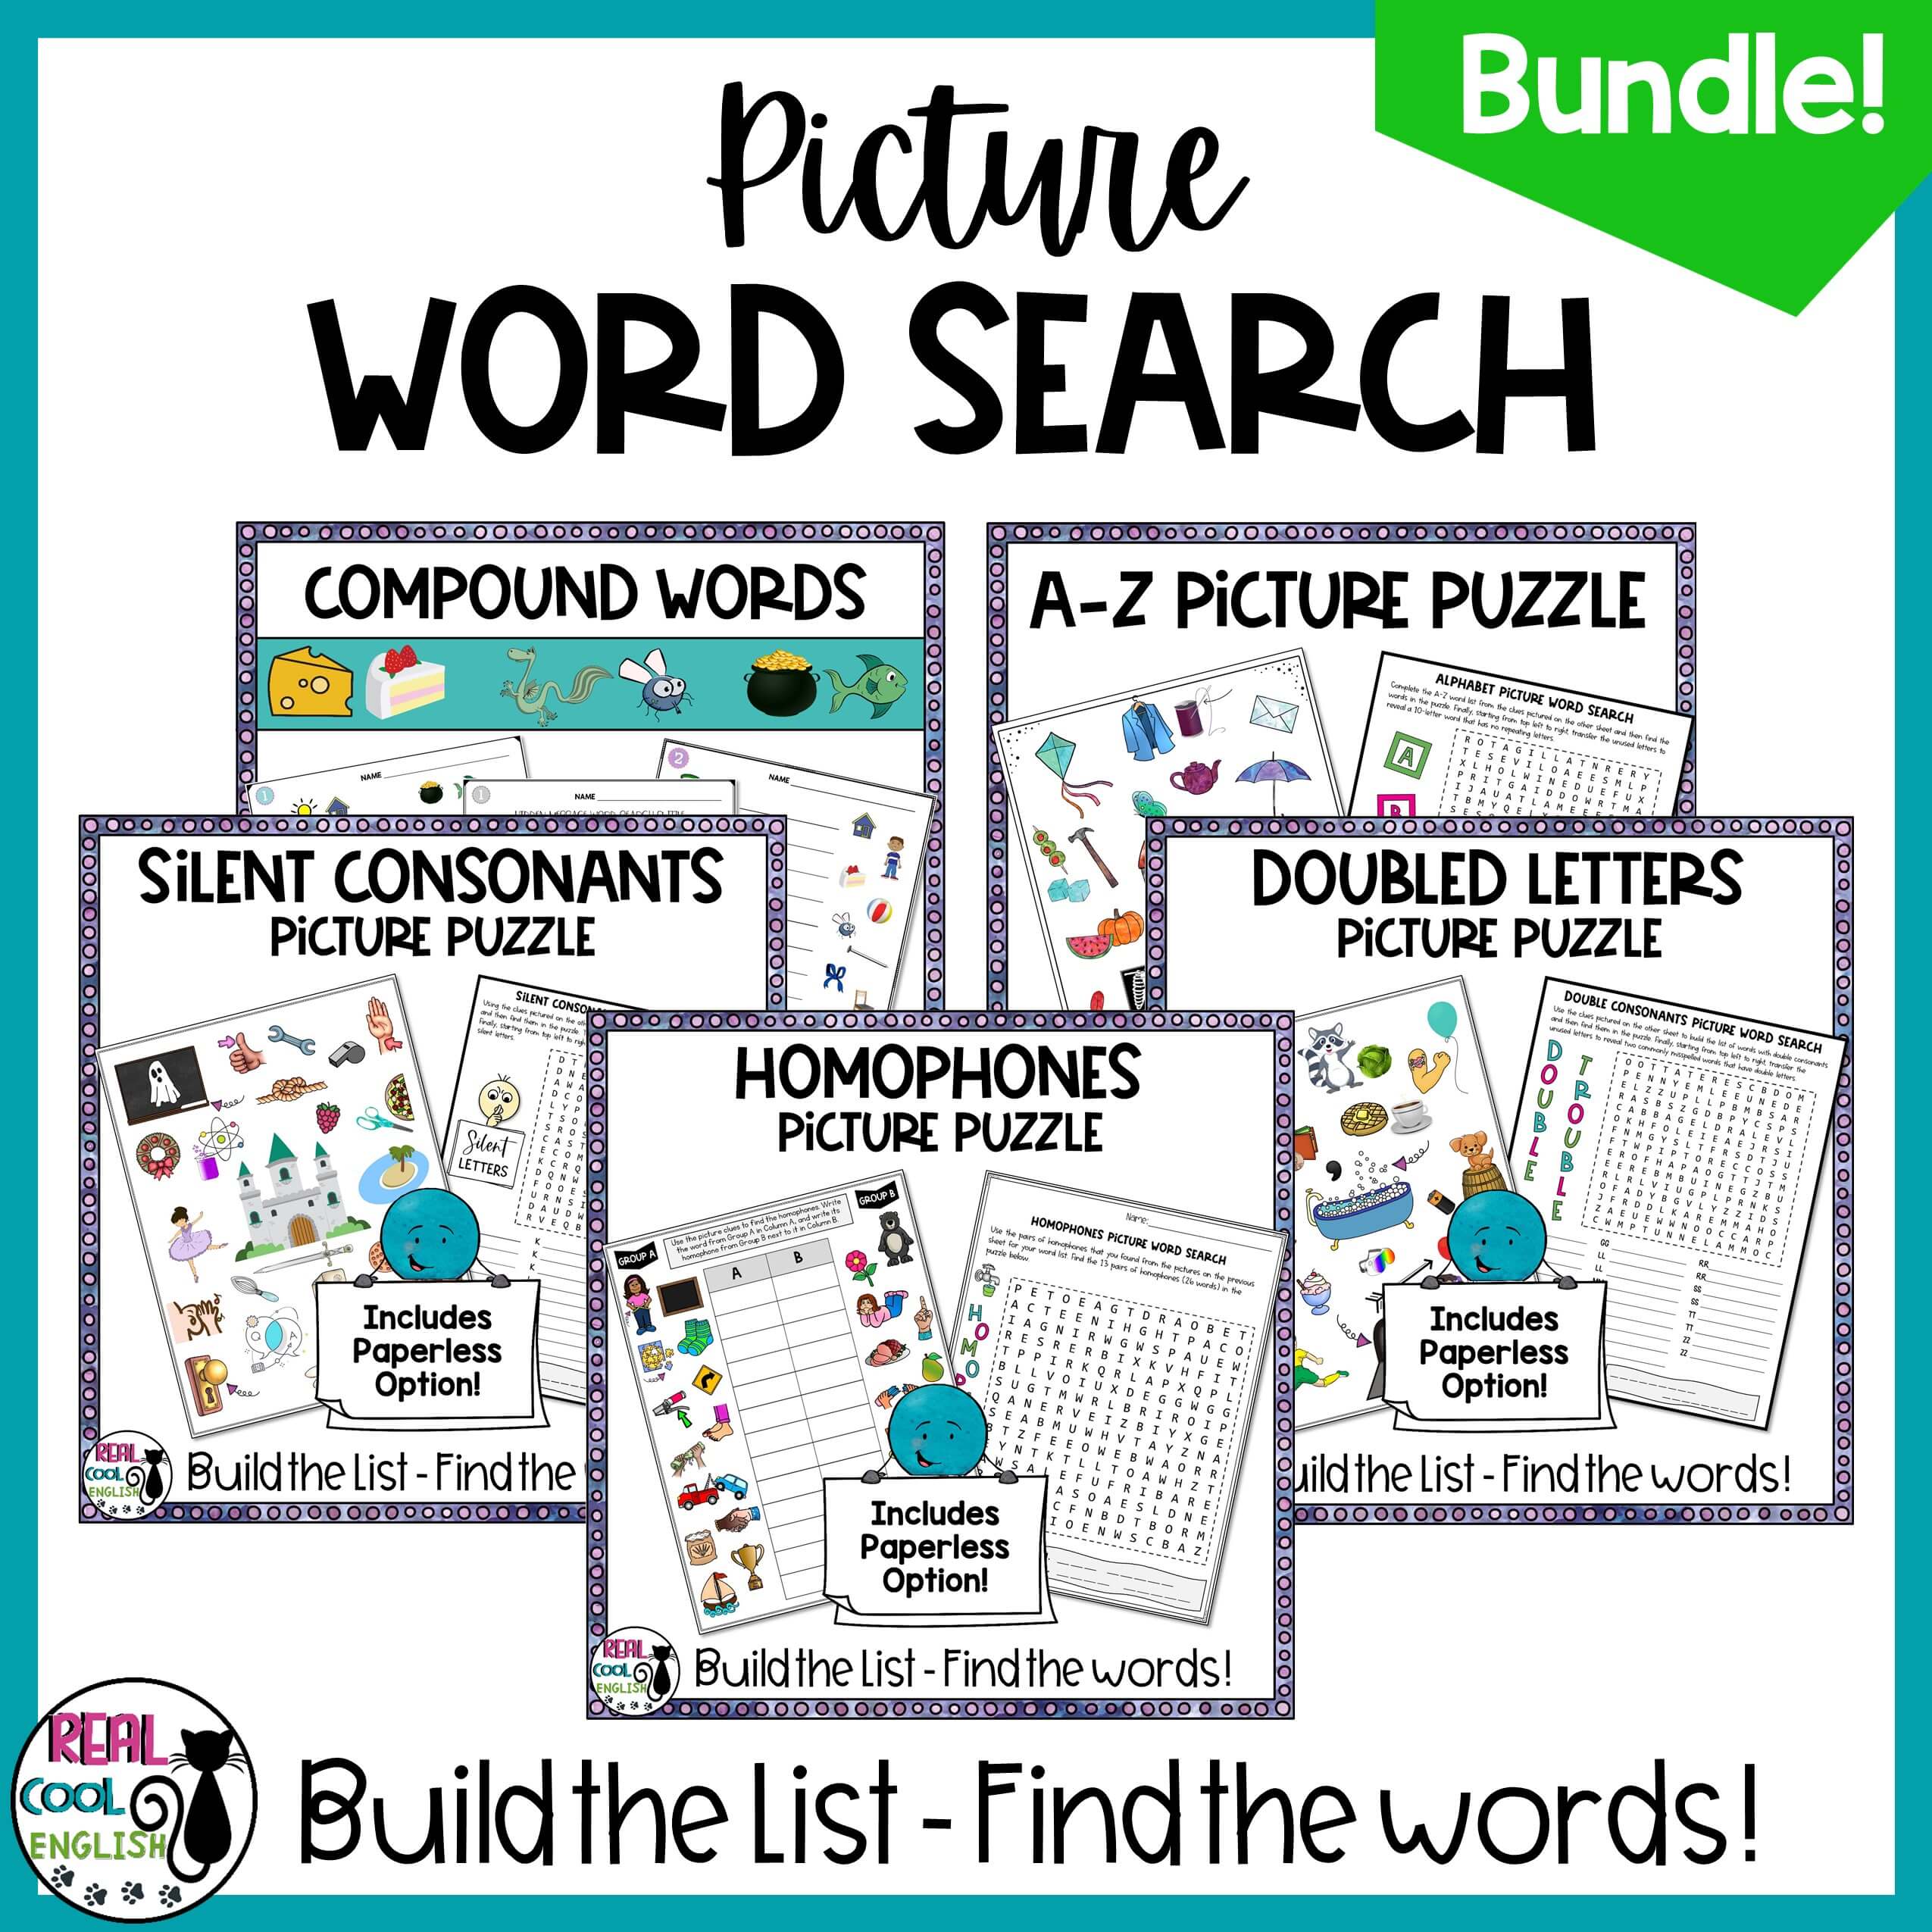 Picture word search puzzles for spelling and vocabulary